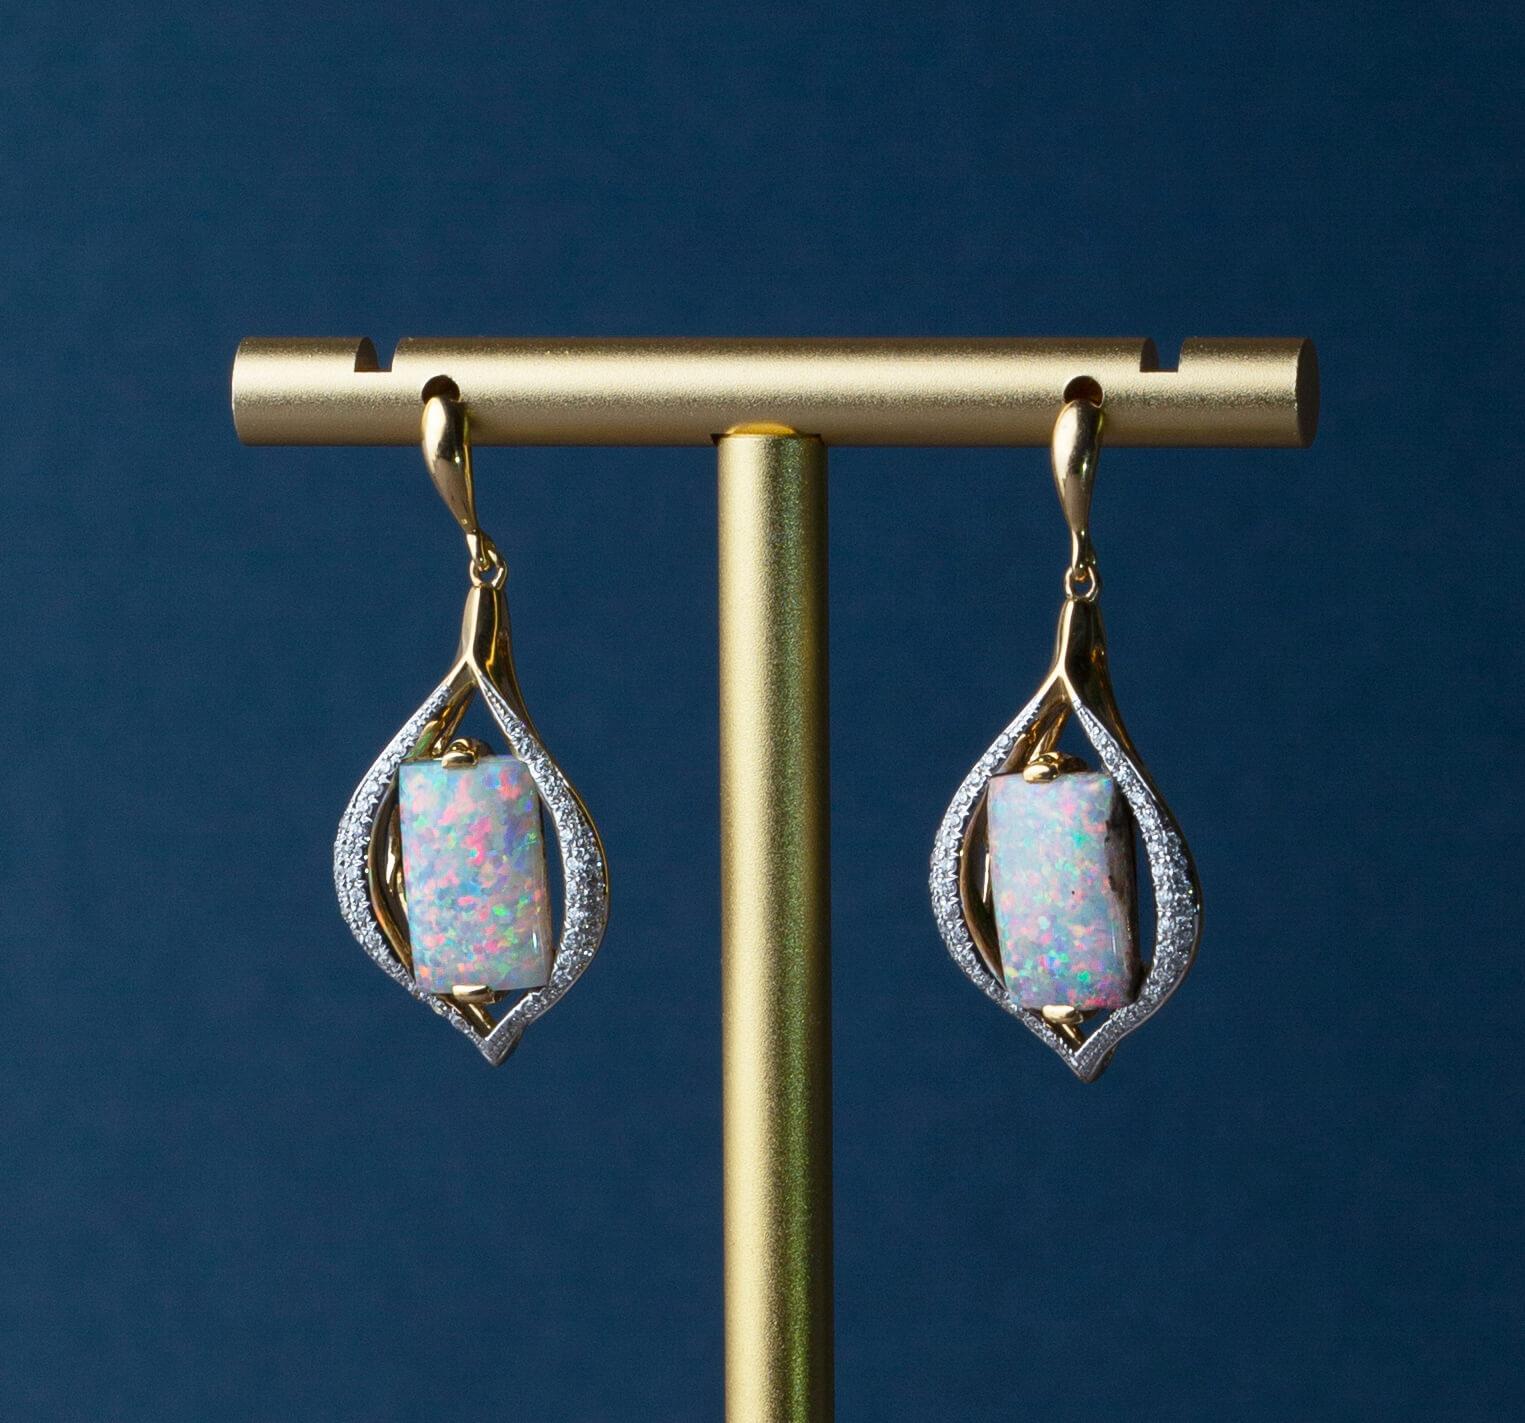 “Two Kisses” opal earrings show off natural, untreated light boulder opals (7.26ct) ethically sourced from our own mines in Jundah-Opalville, Queensland. Beautifully matched rare opals lie suspended between lines of diamonds making “Two Kisses” as